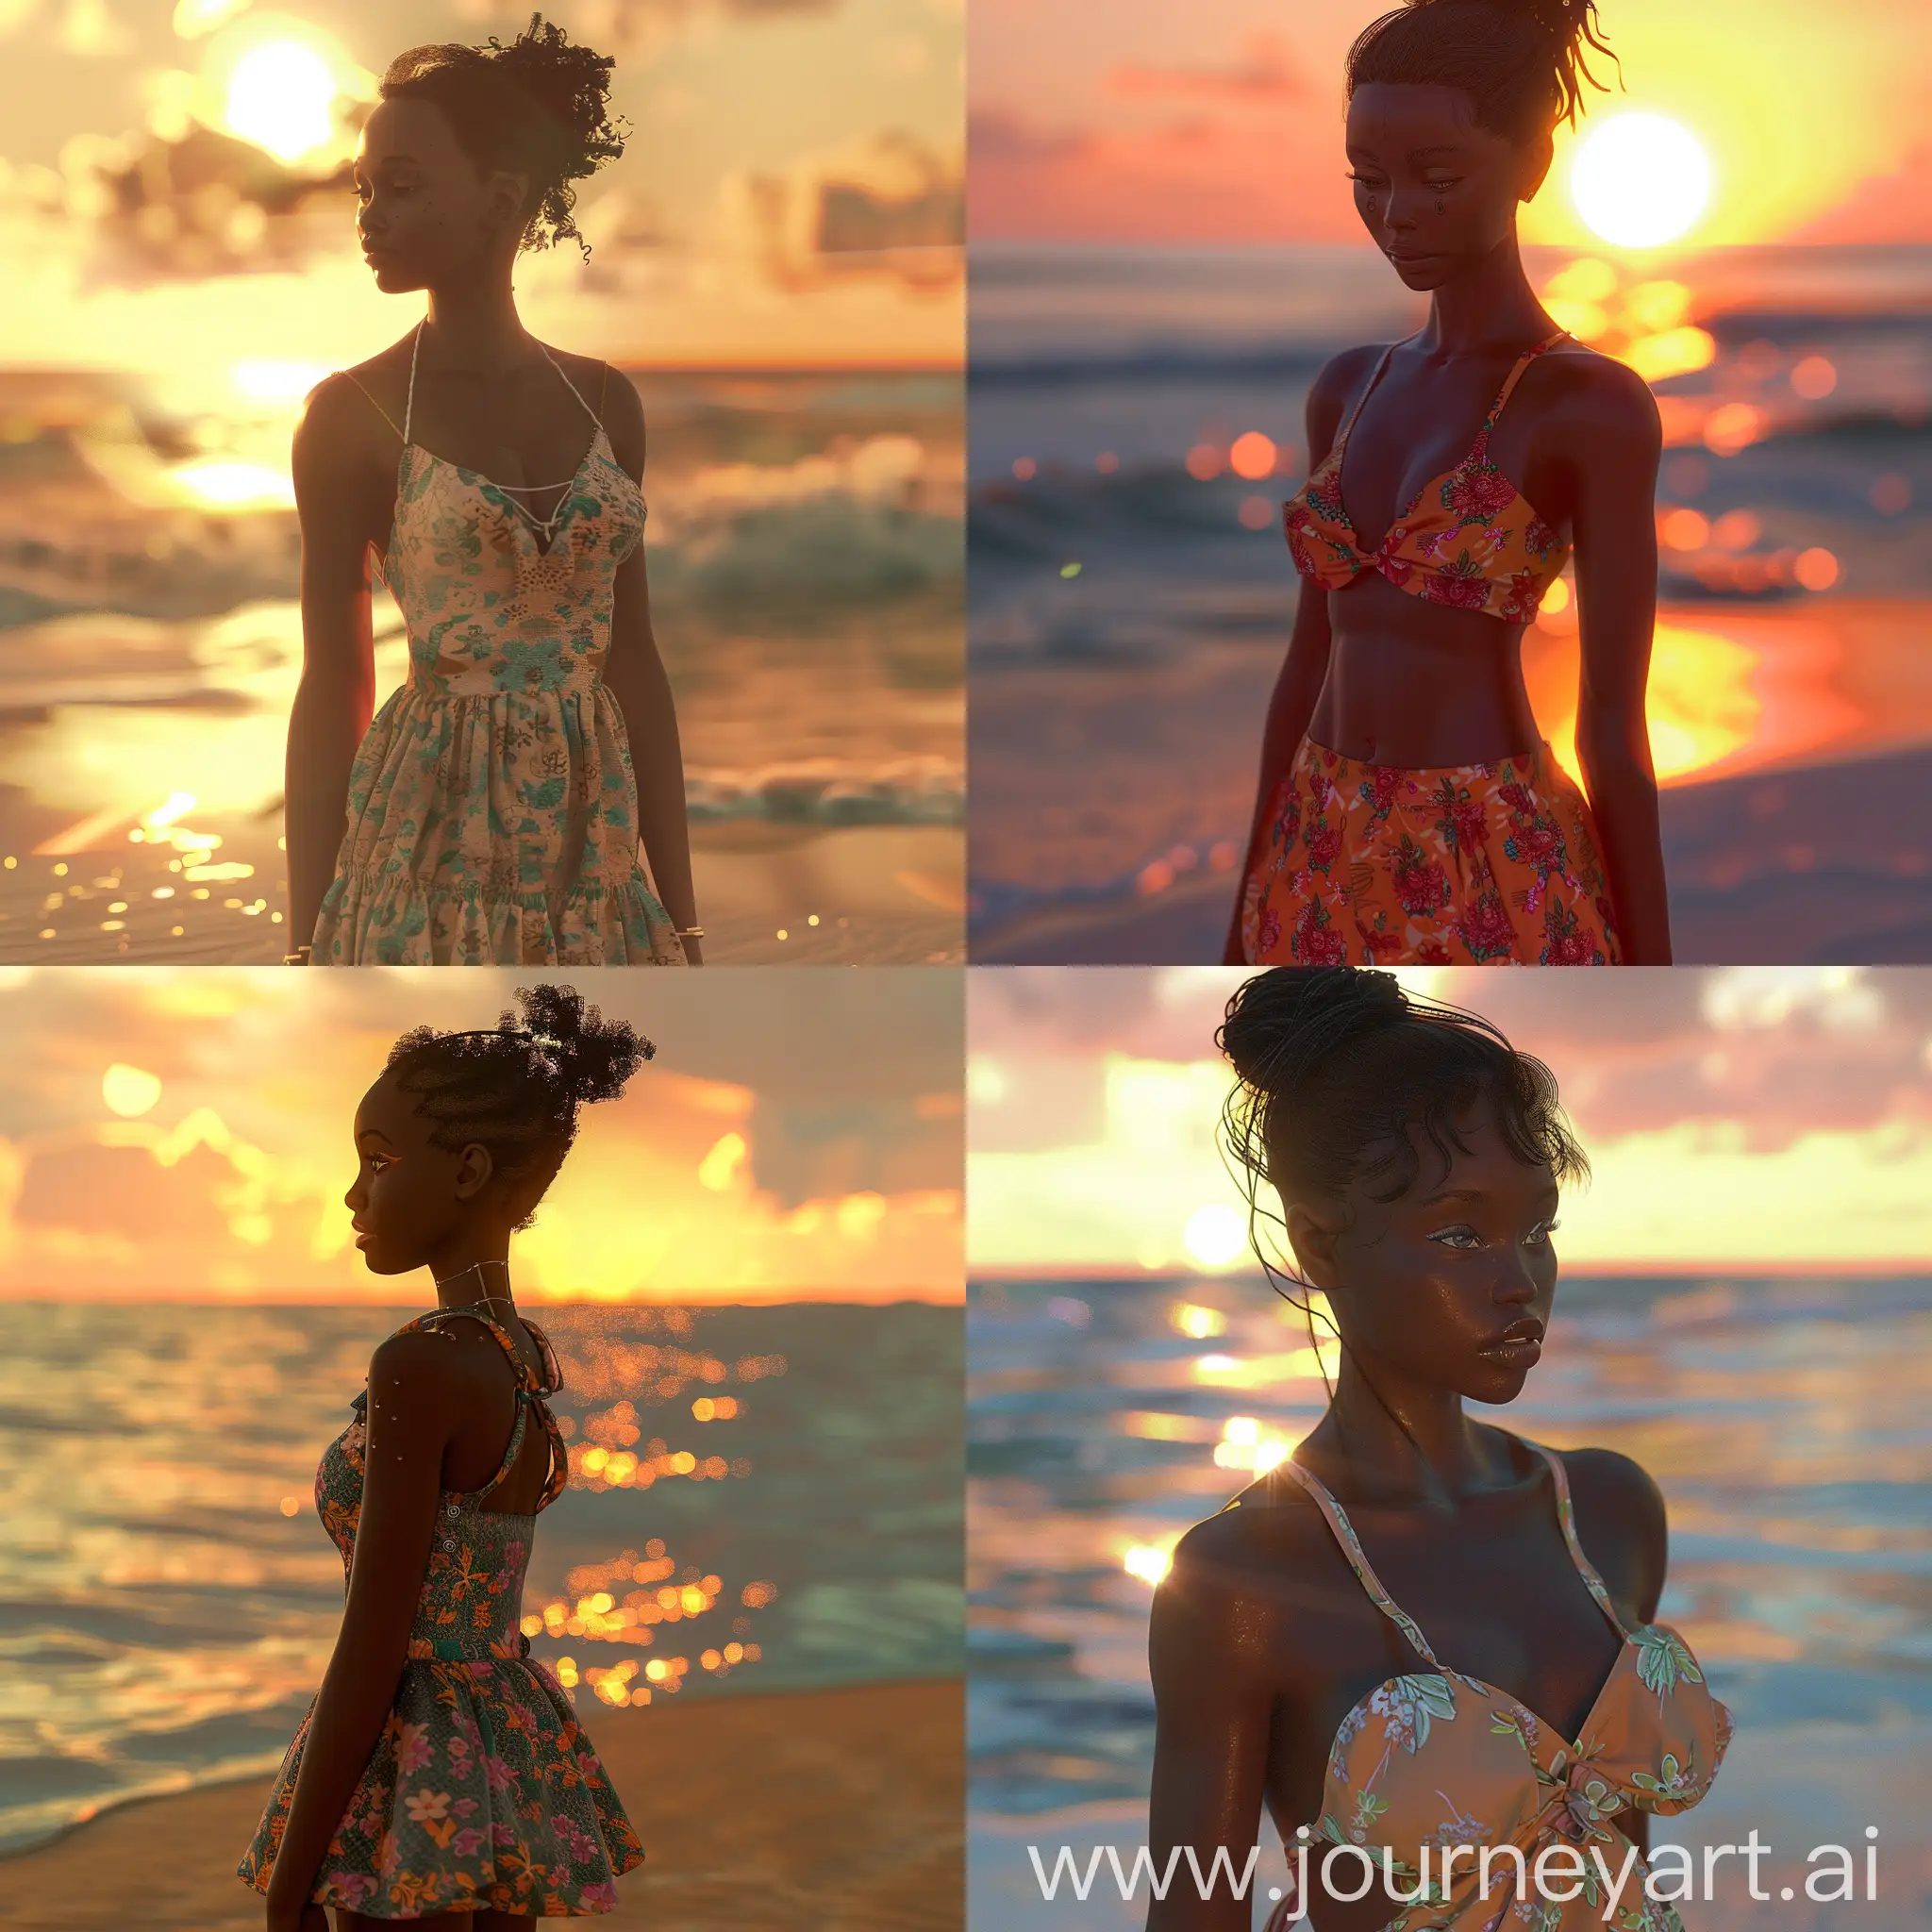 Tranquil-Sunset-Beach-Scene-Android-Black-Woman-in-Summer-Dress